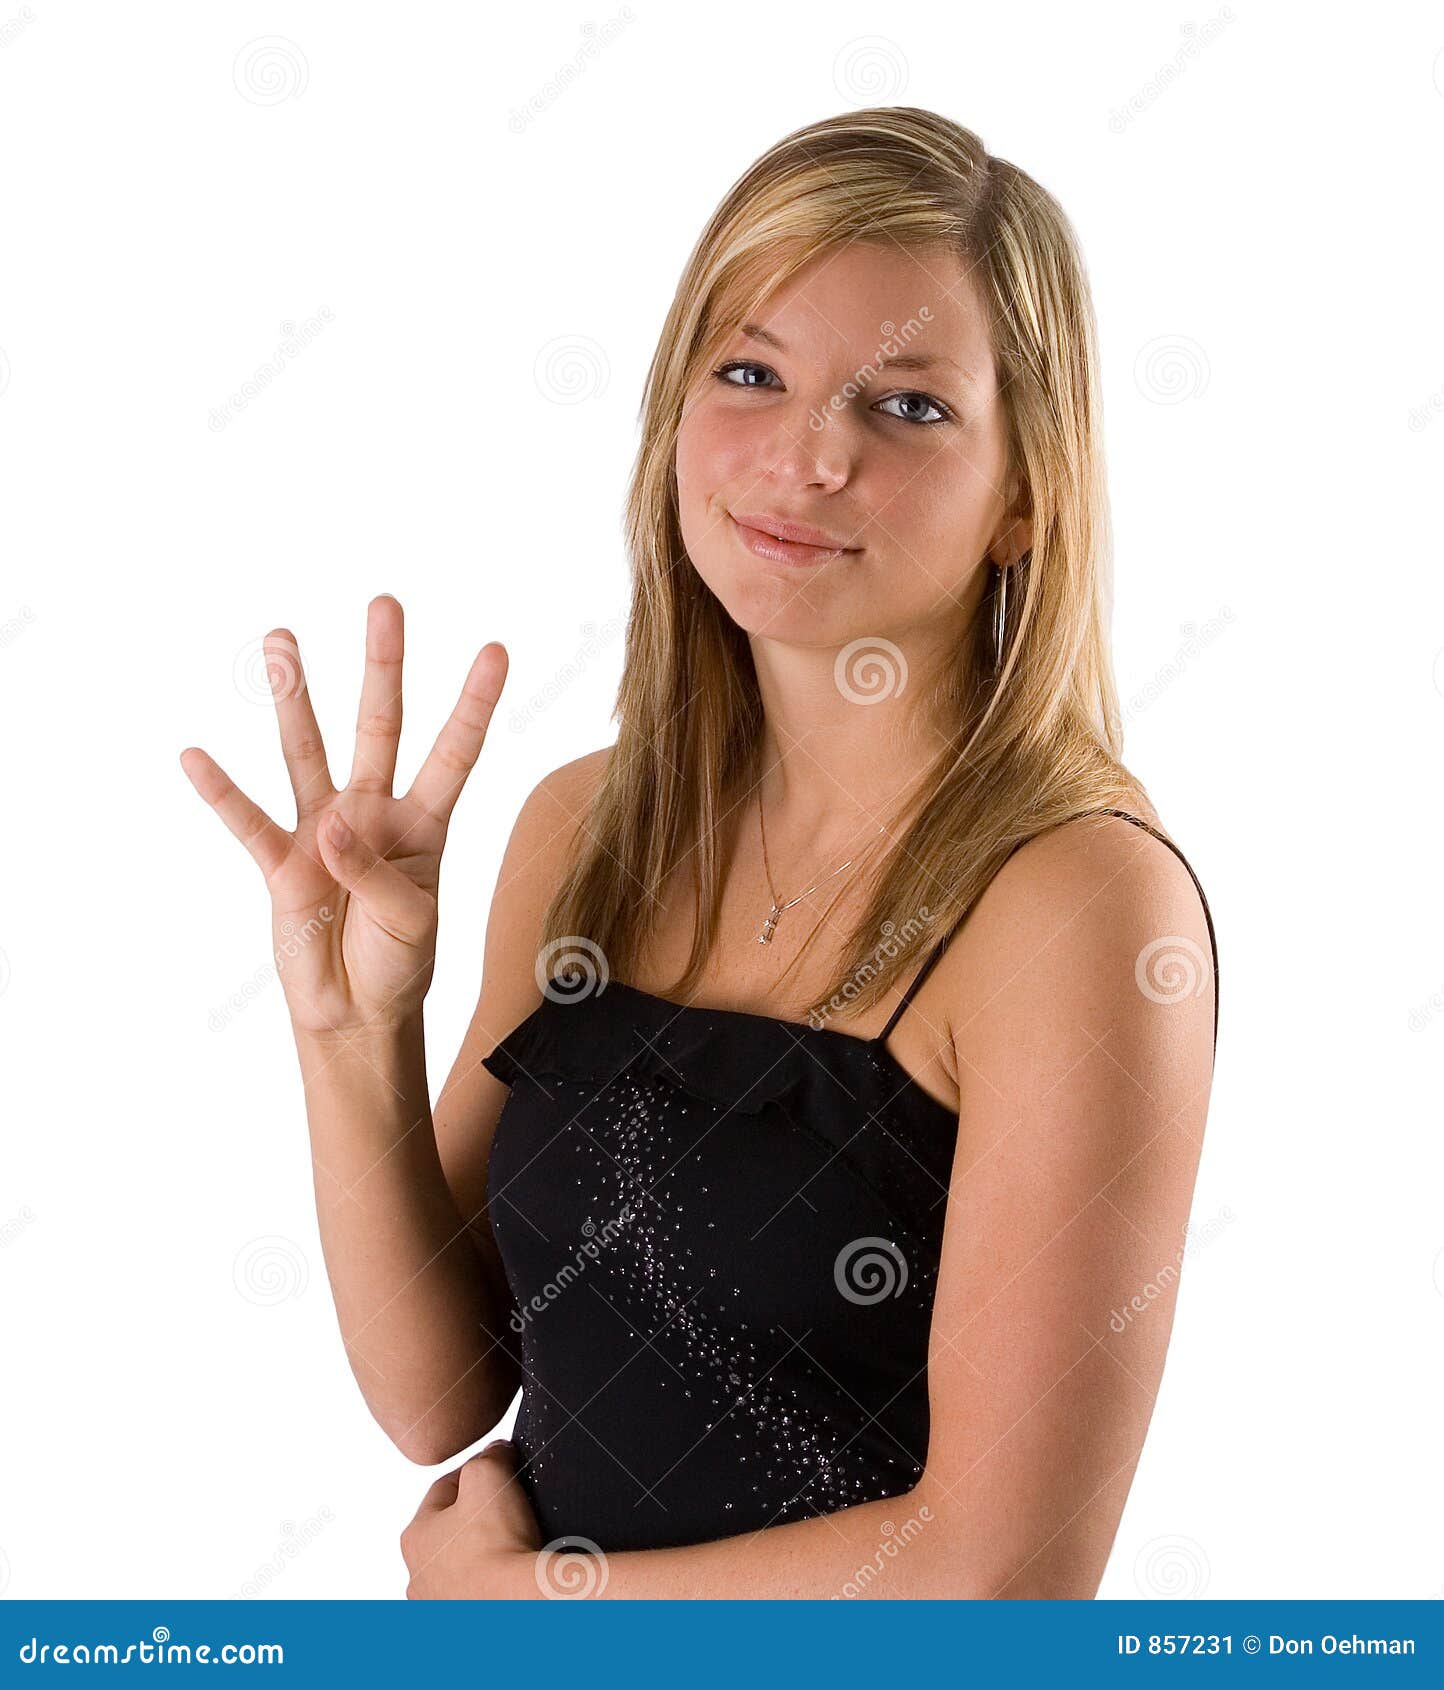 bch add photo girl holding up 4 fingers